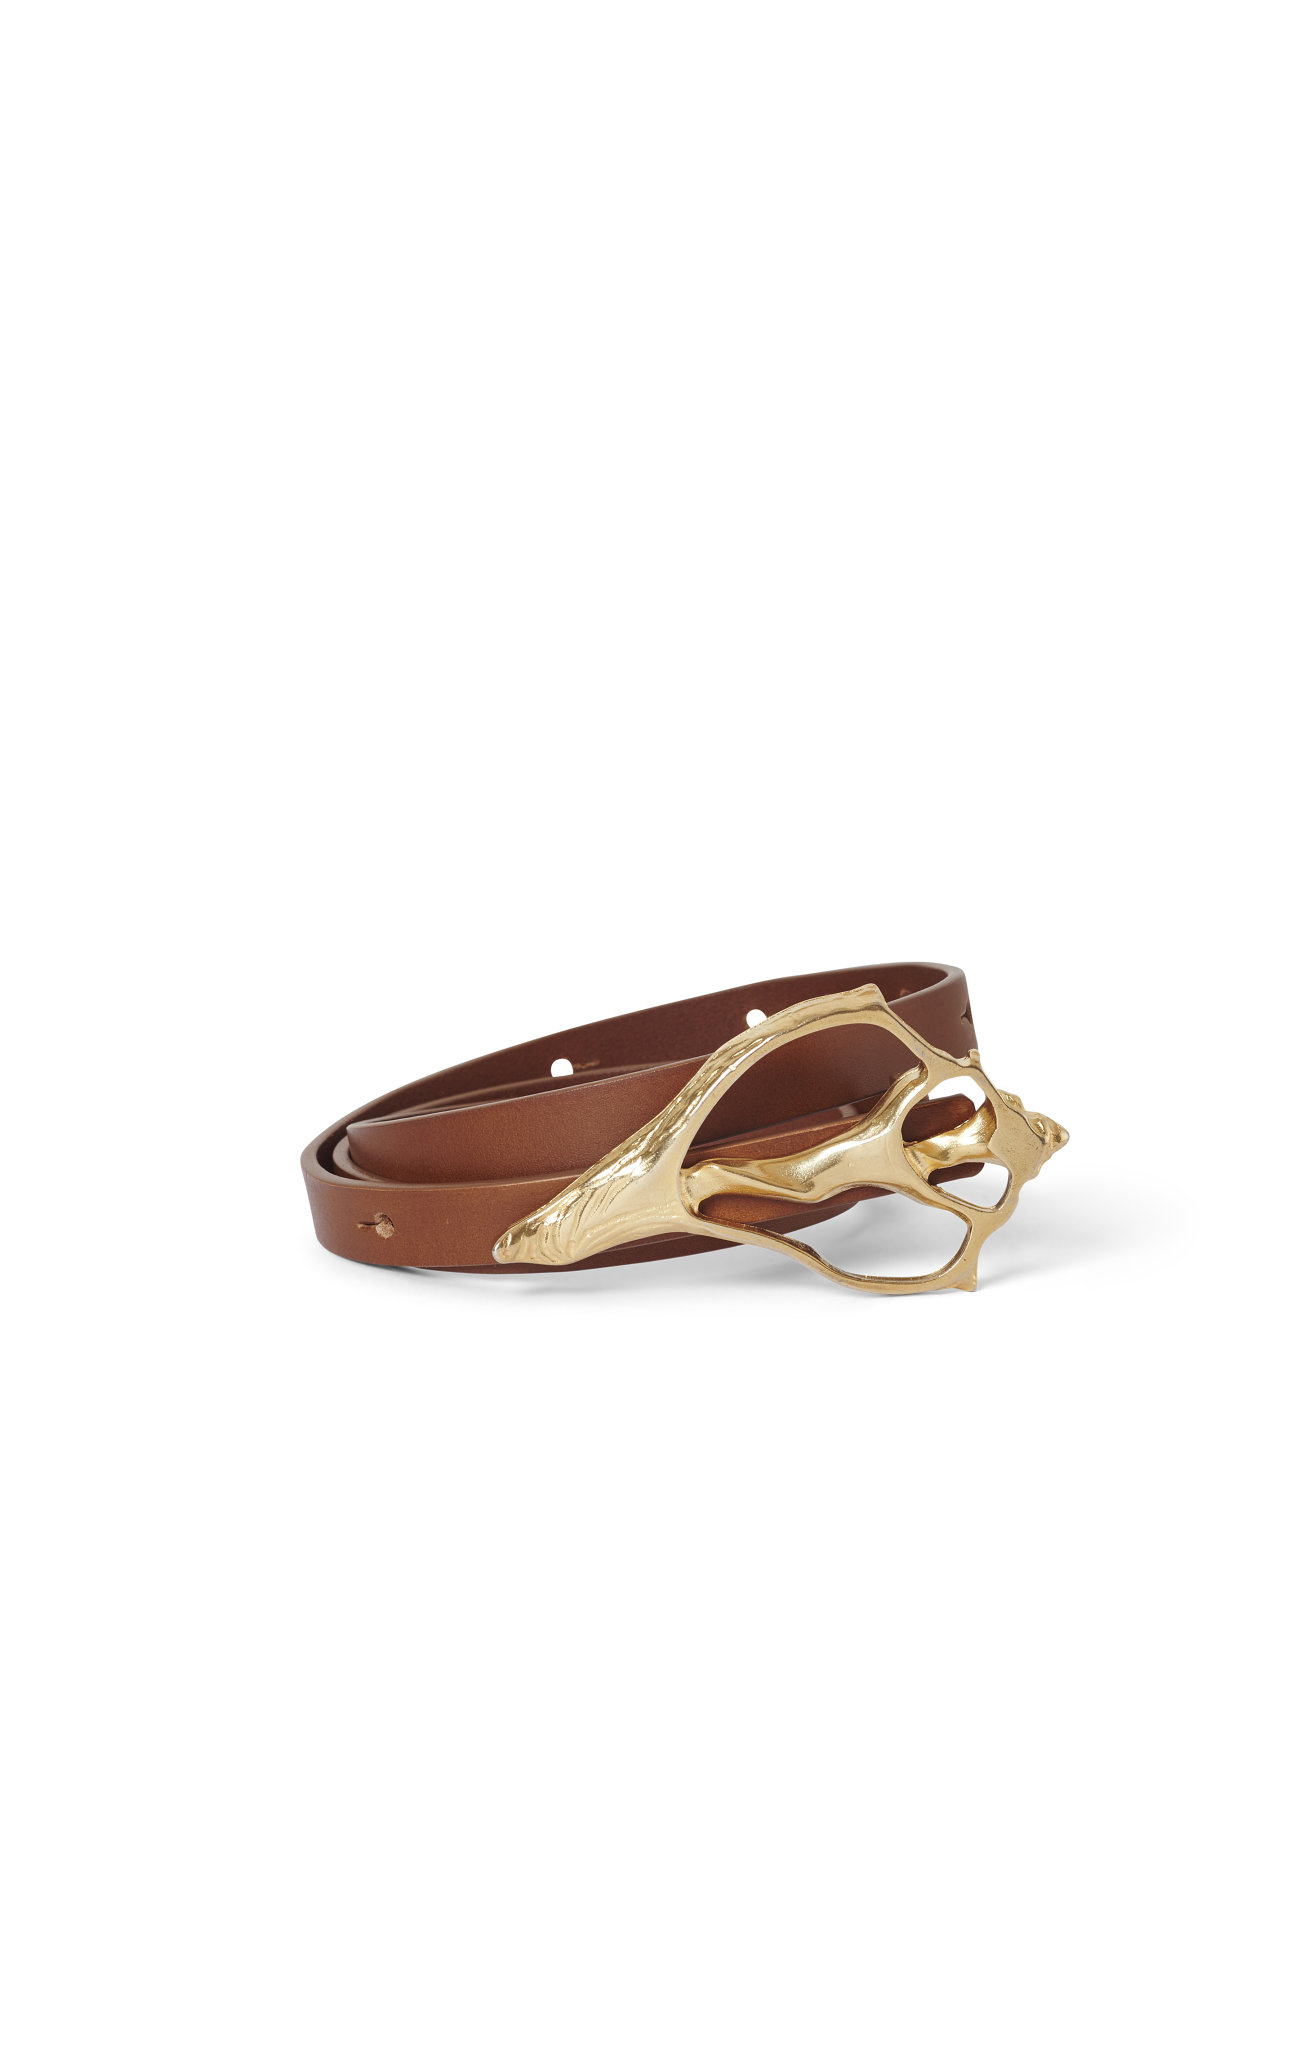 Rodebjer Shell Belt - Brown/Gold